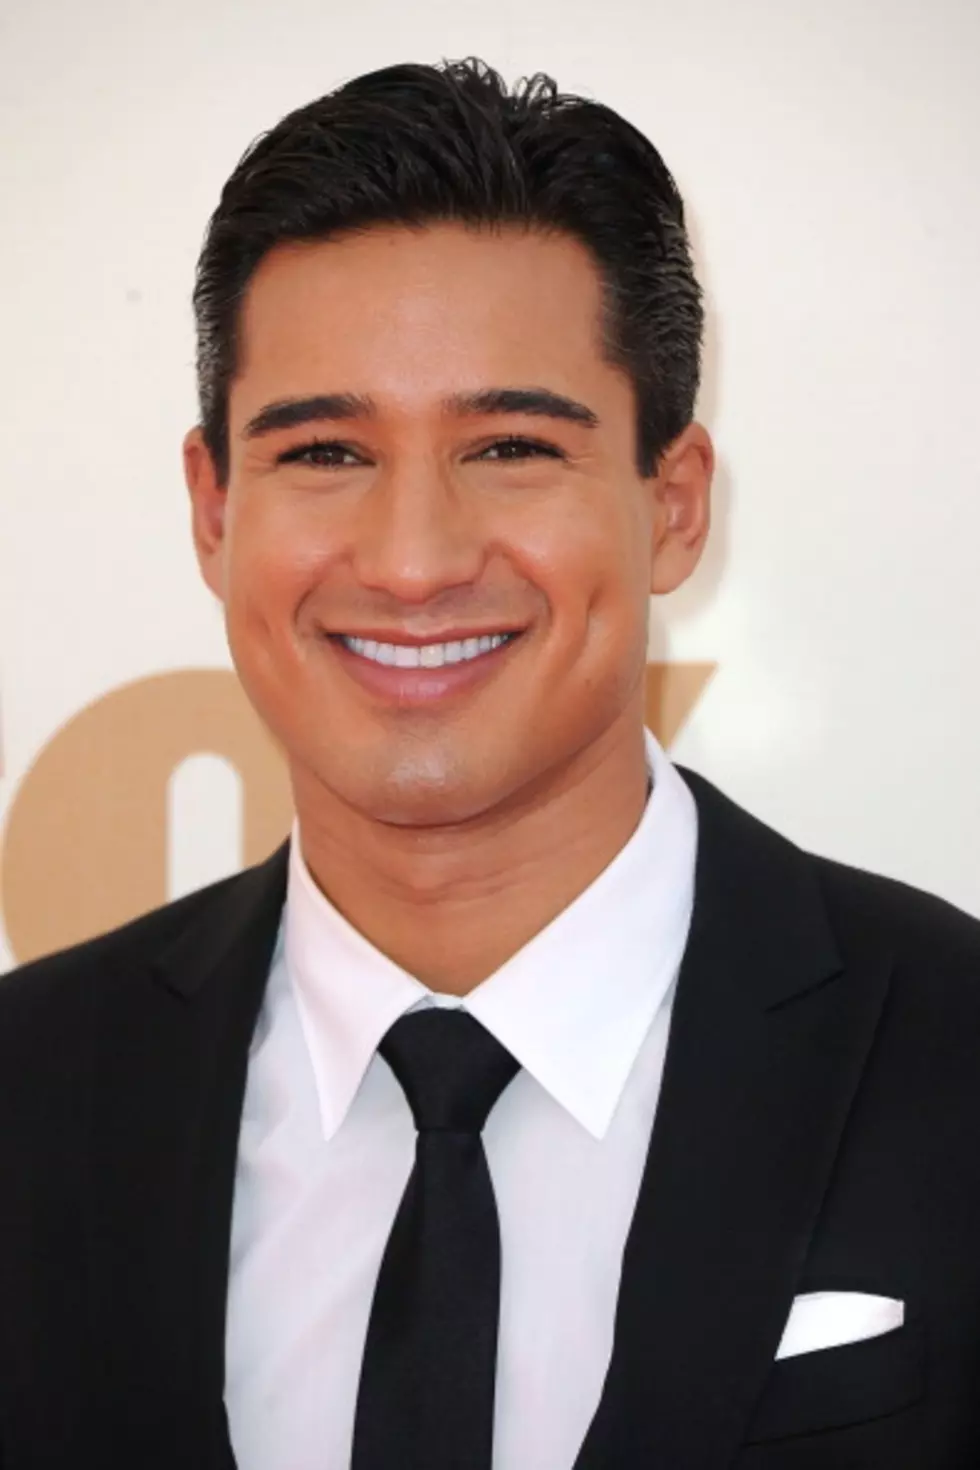 Celebrity Birthday List for Monday October 10 Includes Mario Lopez